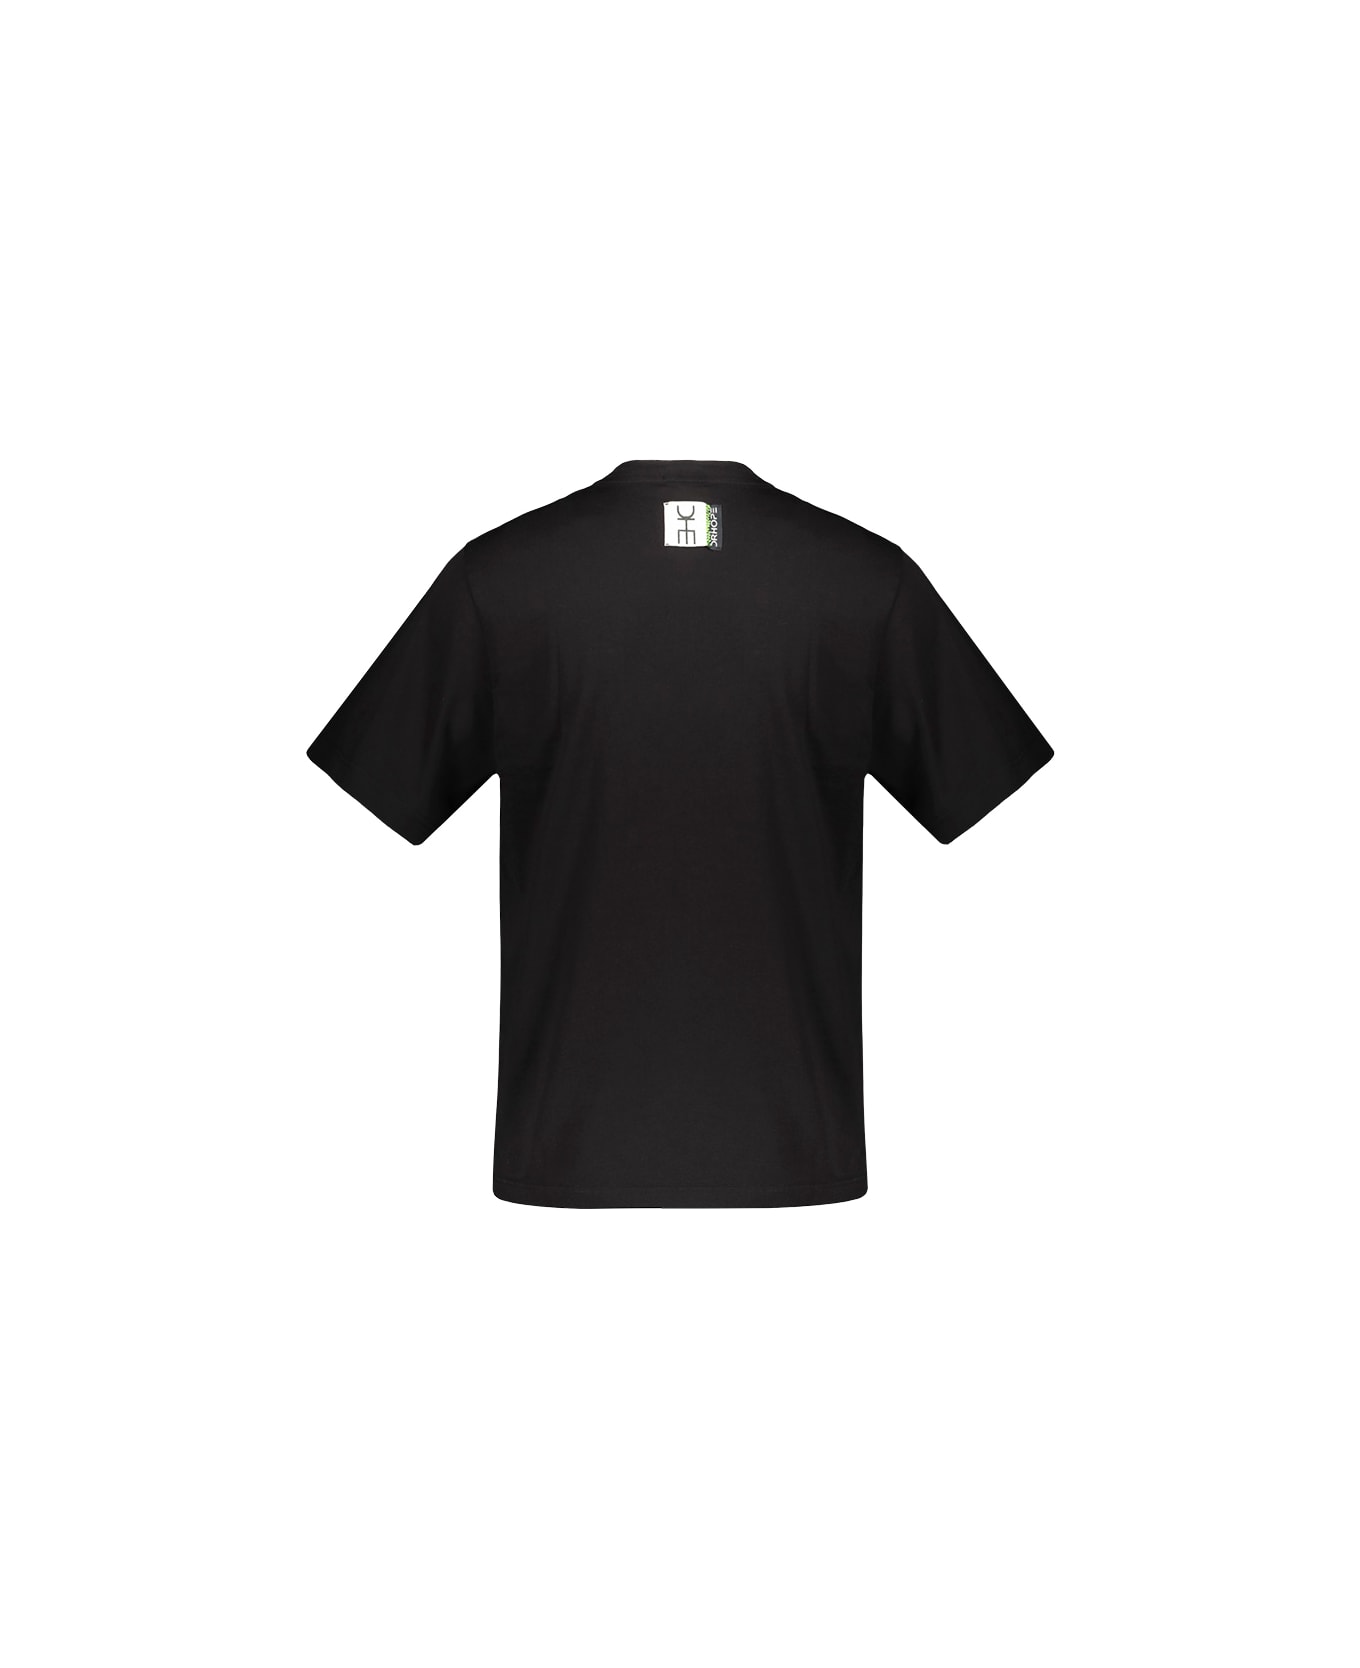 Drhope Black T-shirt With Embroidered Logo - Black